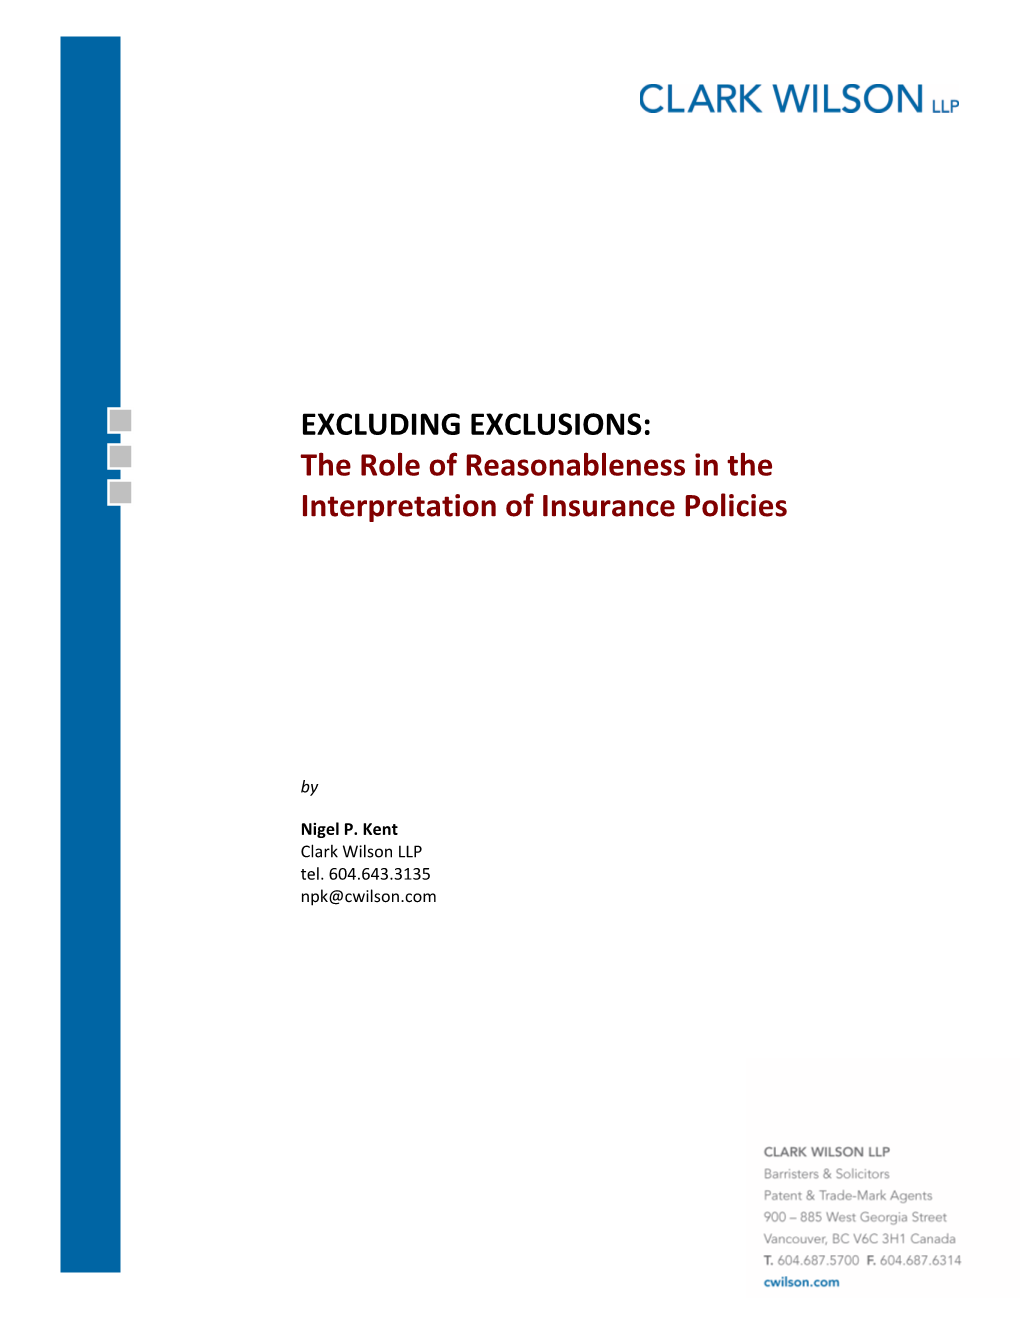 EXCLUDING EXCLUSIONS: the Role of Reasonableness in the Interpretation of Insurance Policies